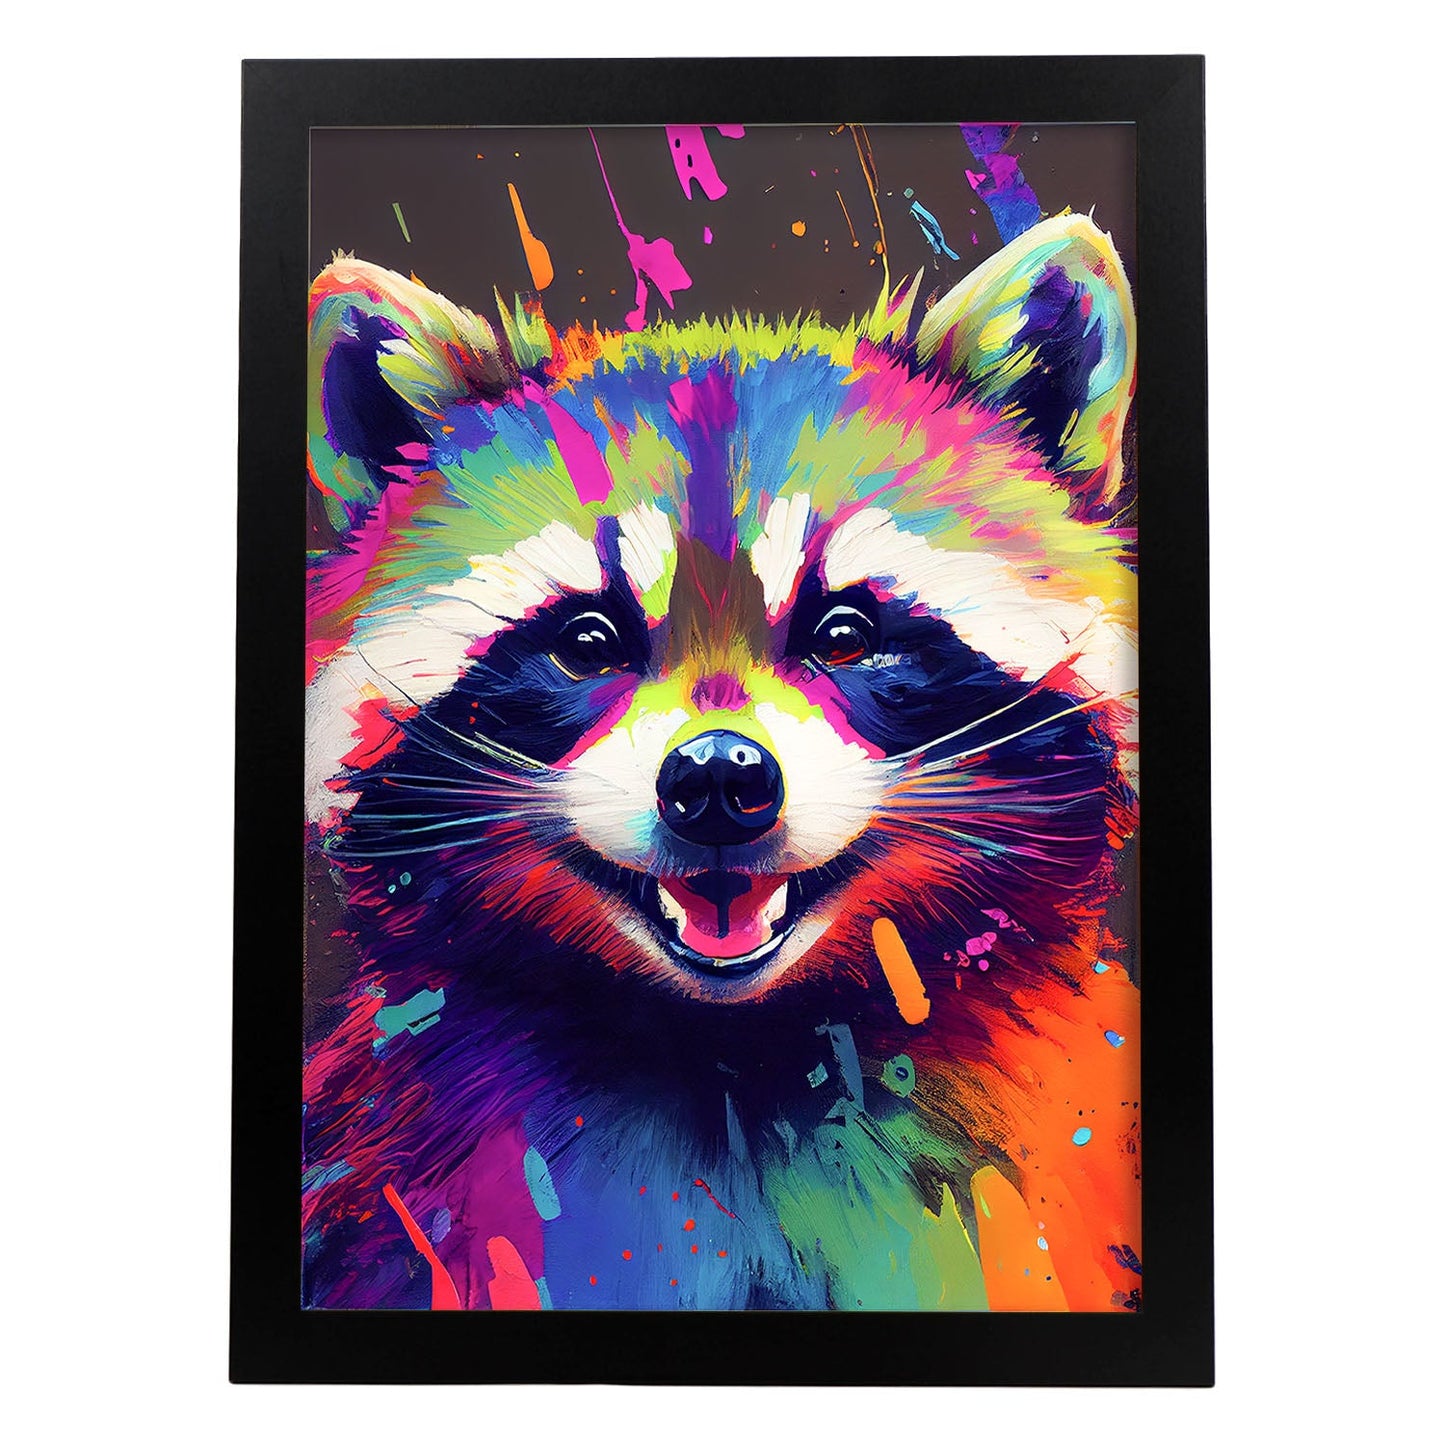 Nacnic Abstract smiling Raccoon in Lisa Fran Style. Aesthetic Wall Art Prints for Bedroom or Living Room Design.